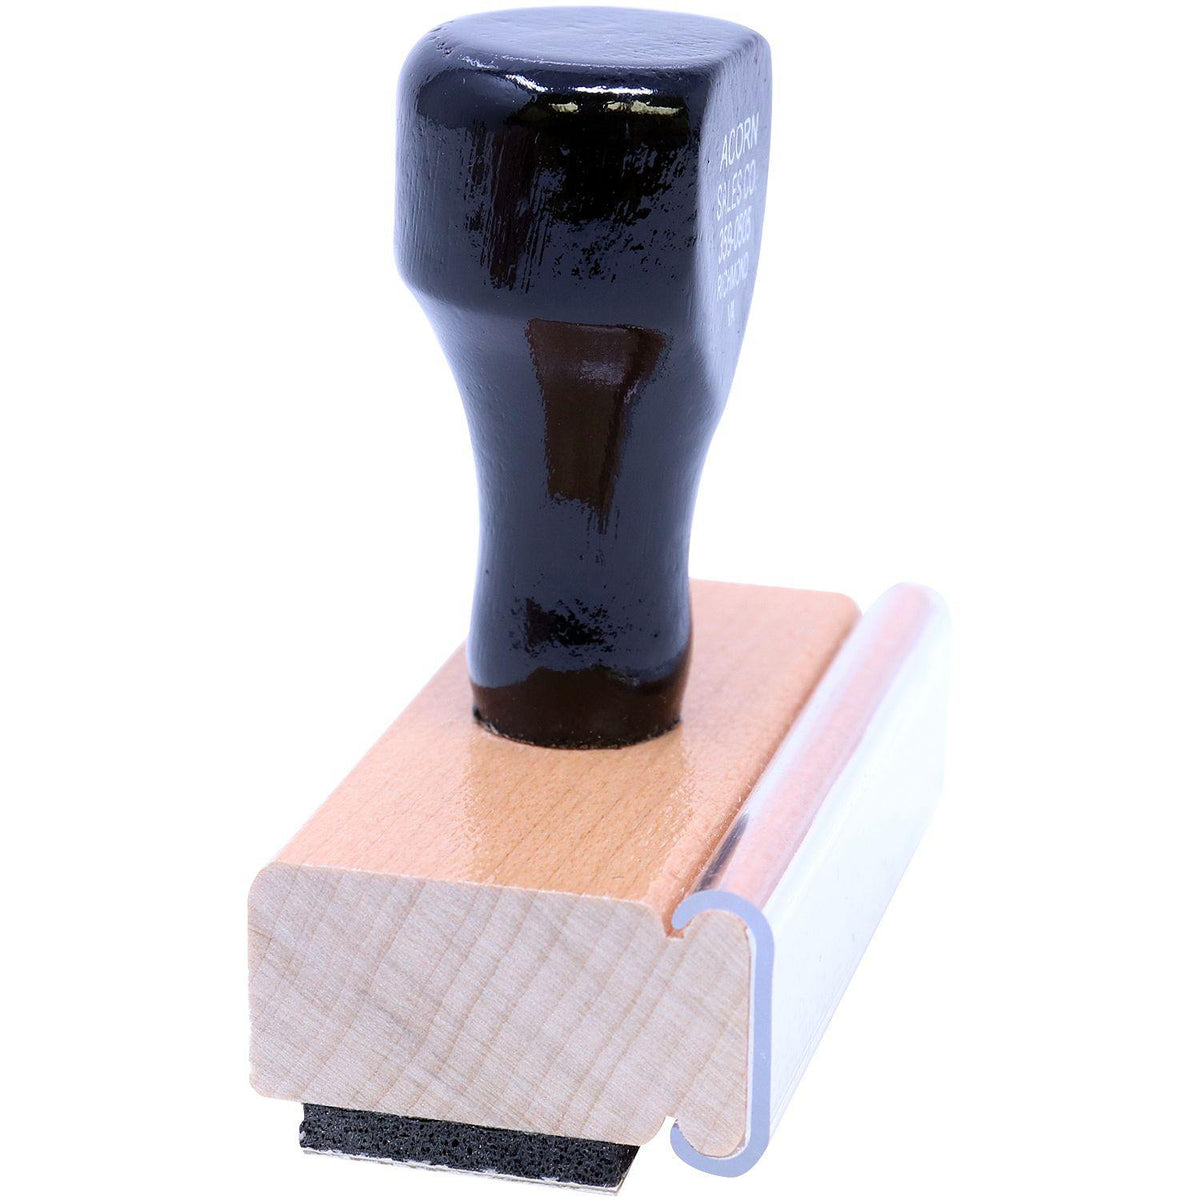 Side View of Large Attorneys Copy Rubber Stamp at an Angle